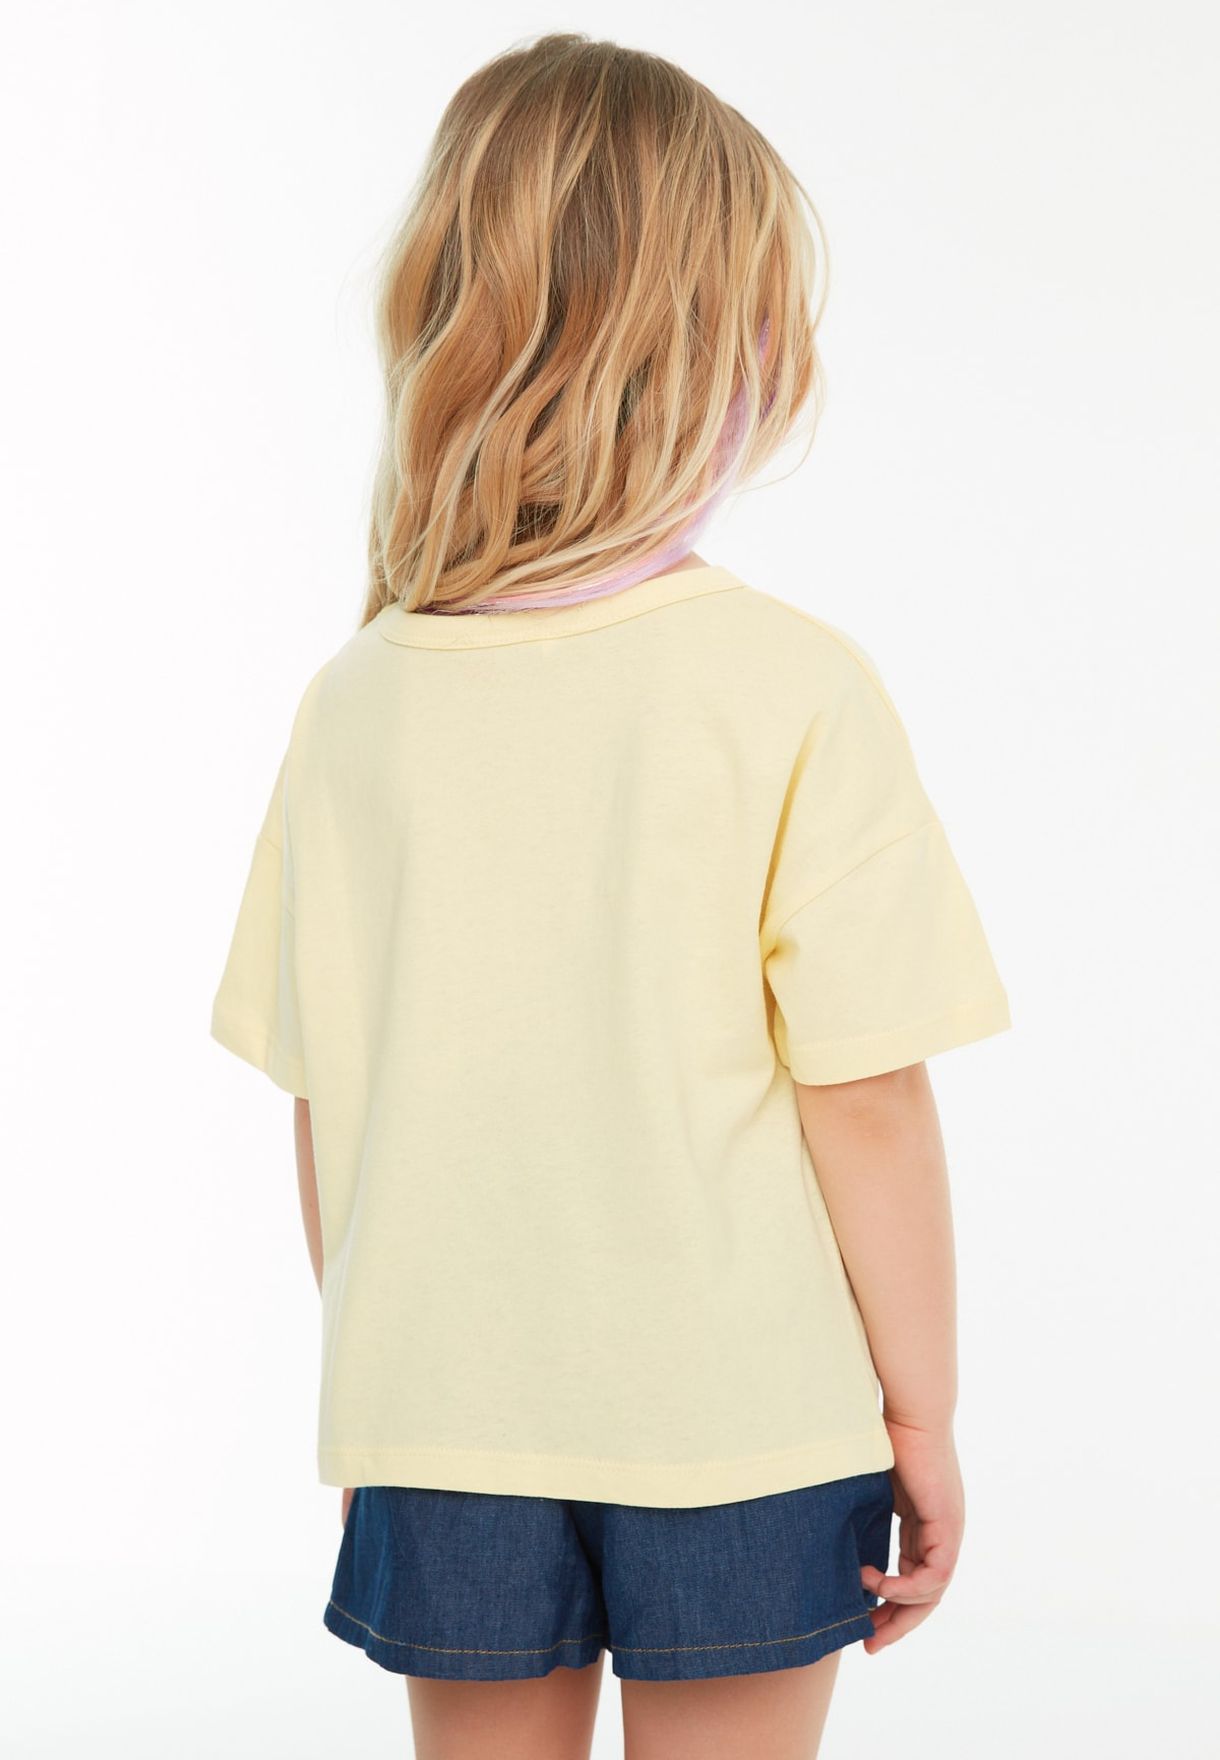 Kids Double Sided Sequin T-Shirt